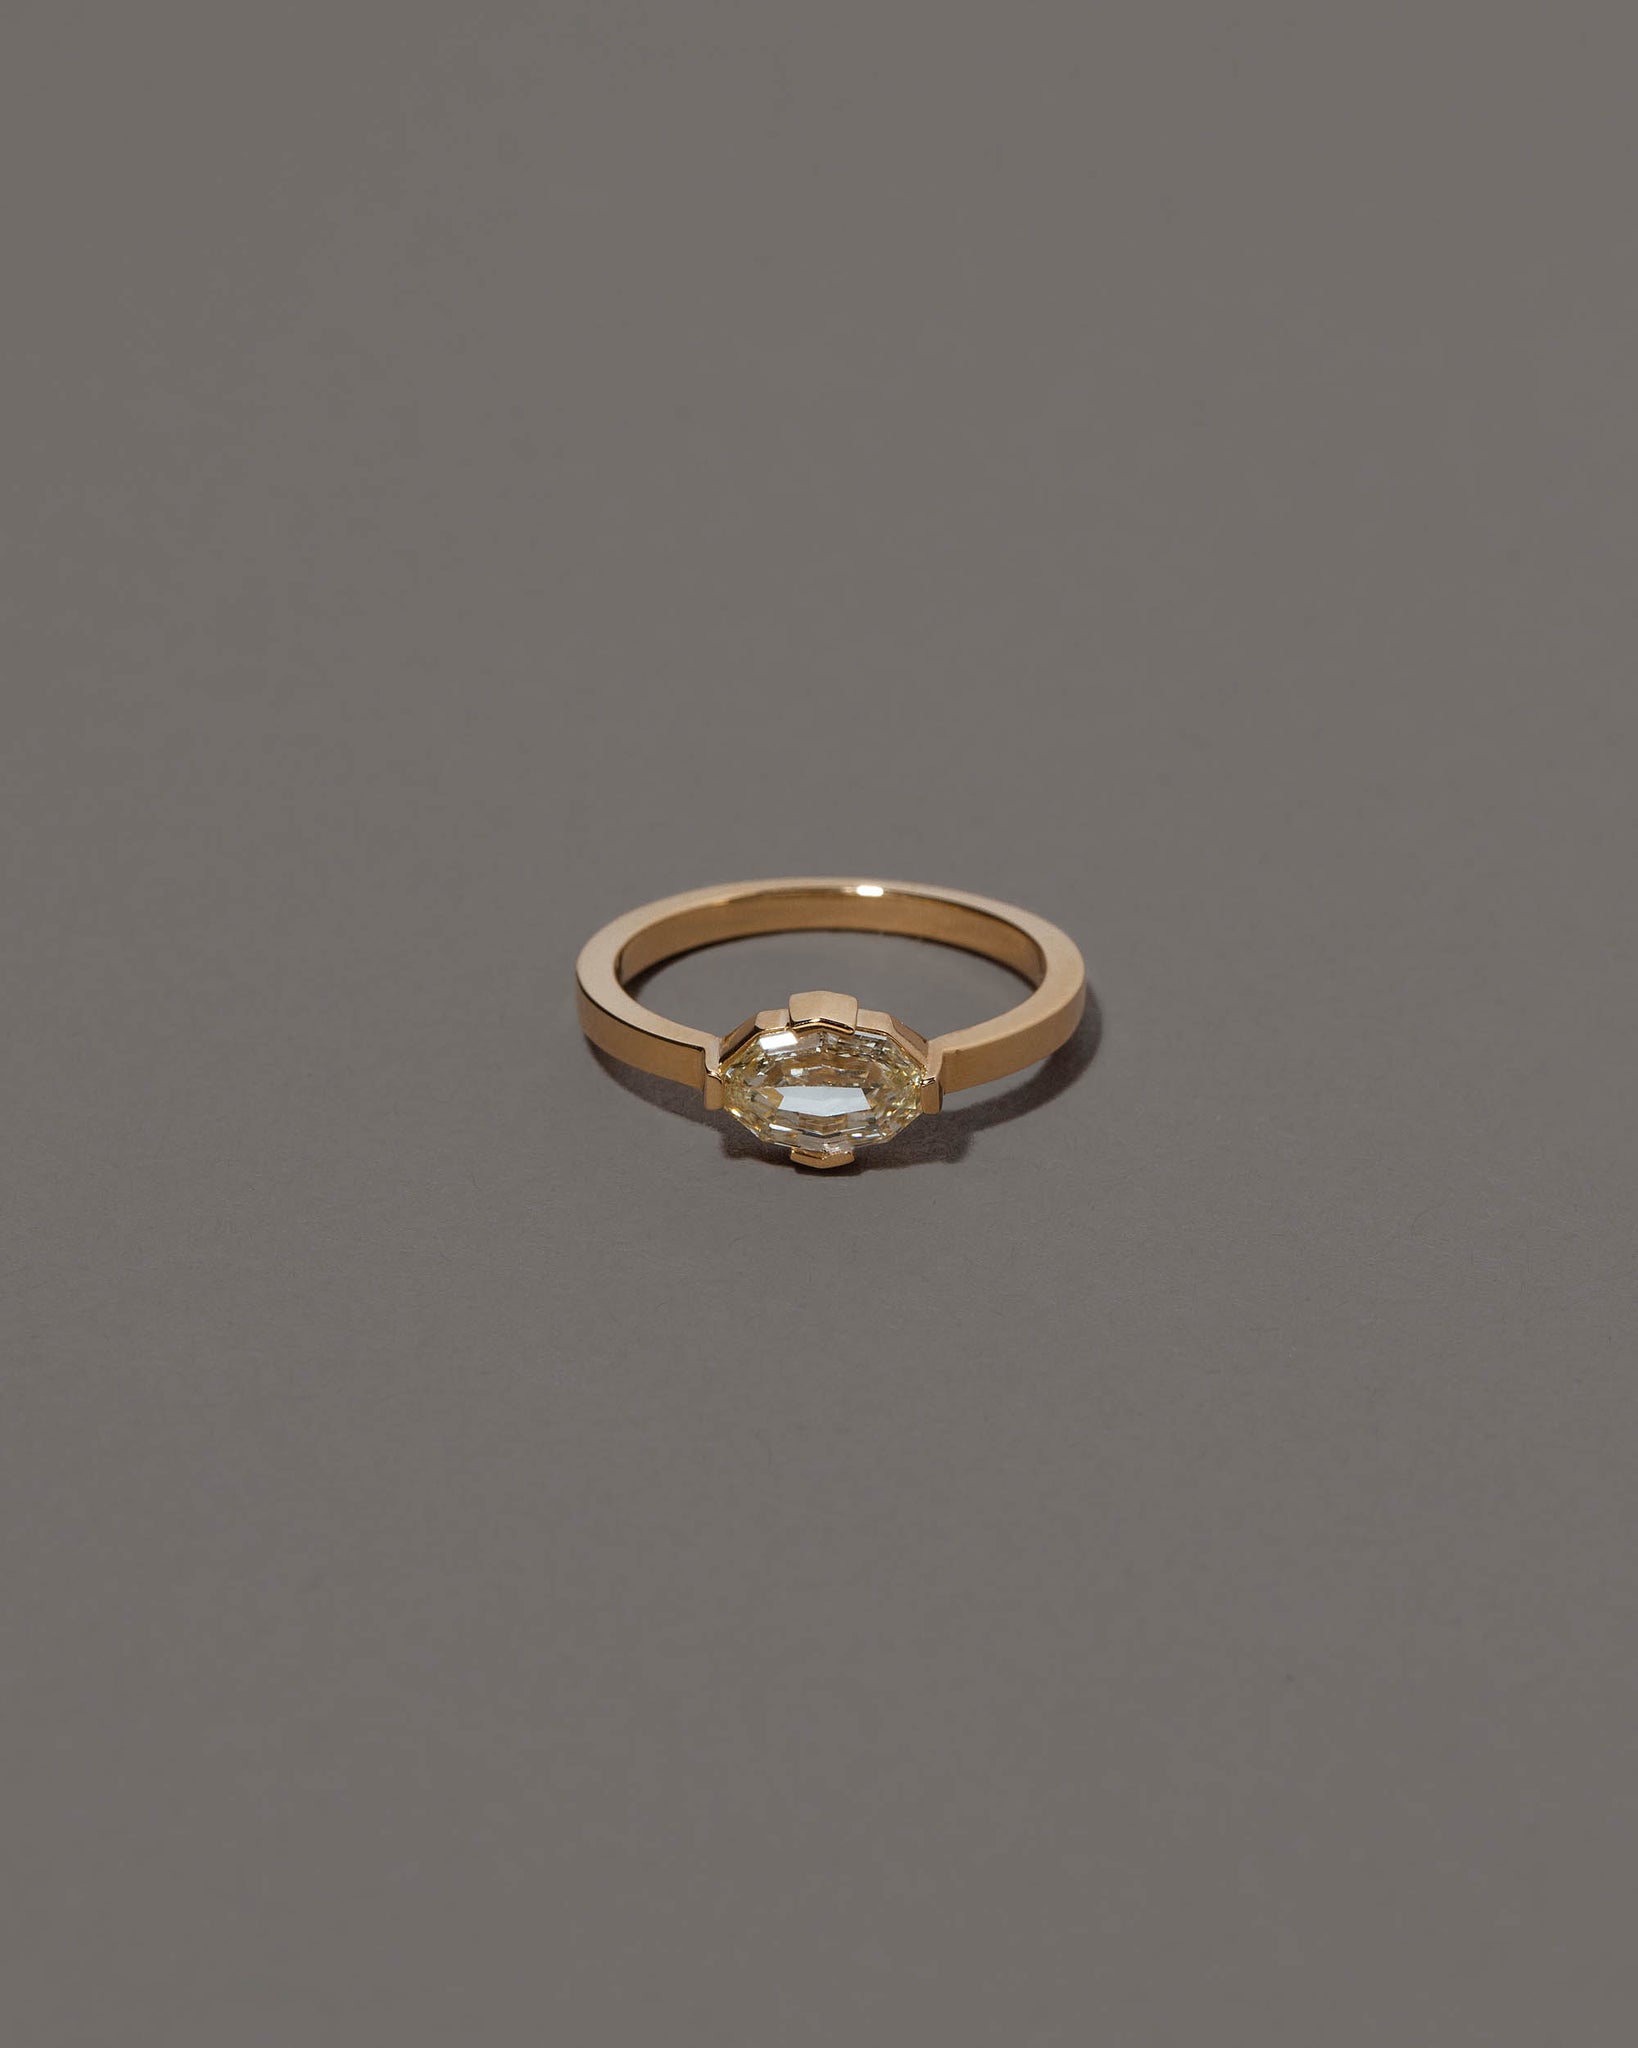 Beholden Ring on grey color background.